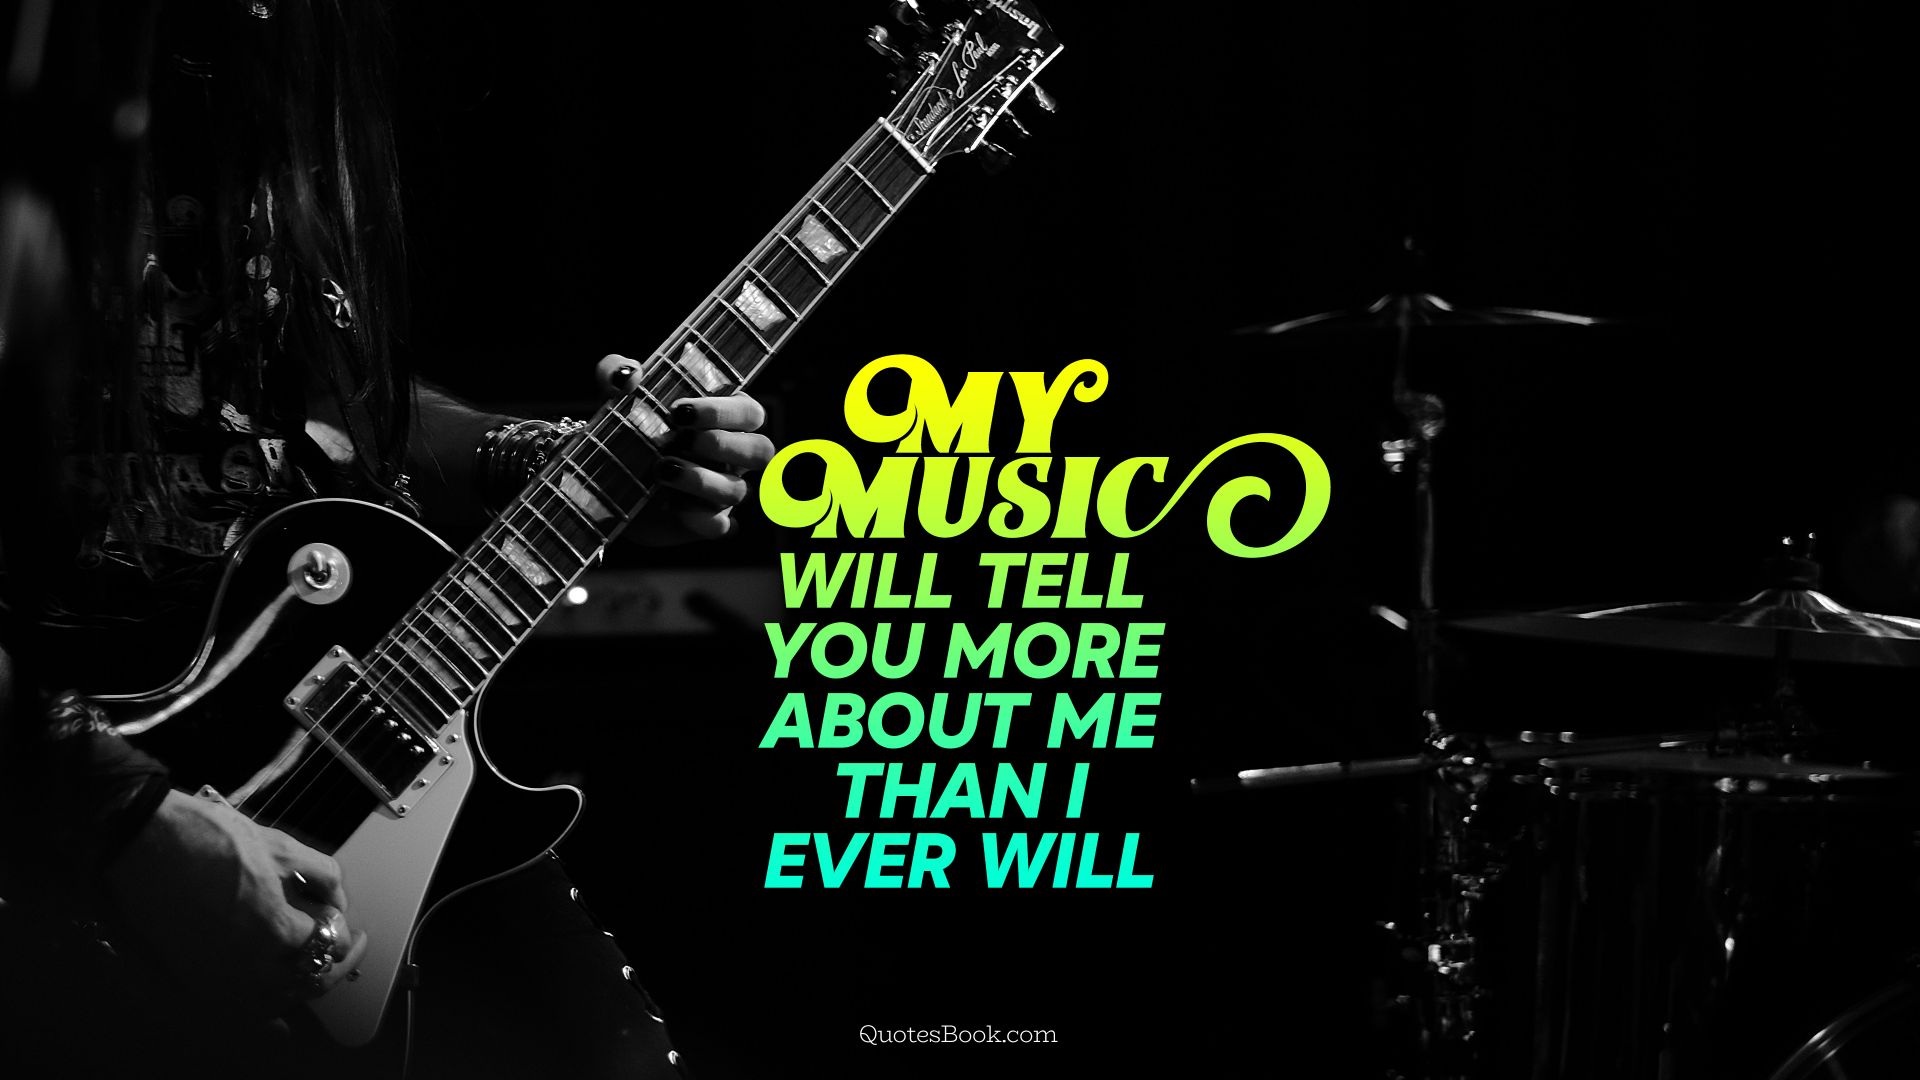 My music will tell you more about me than I ever will - QuotesBook